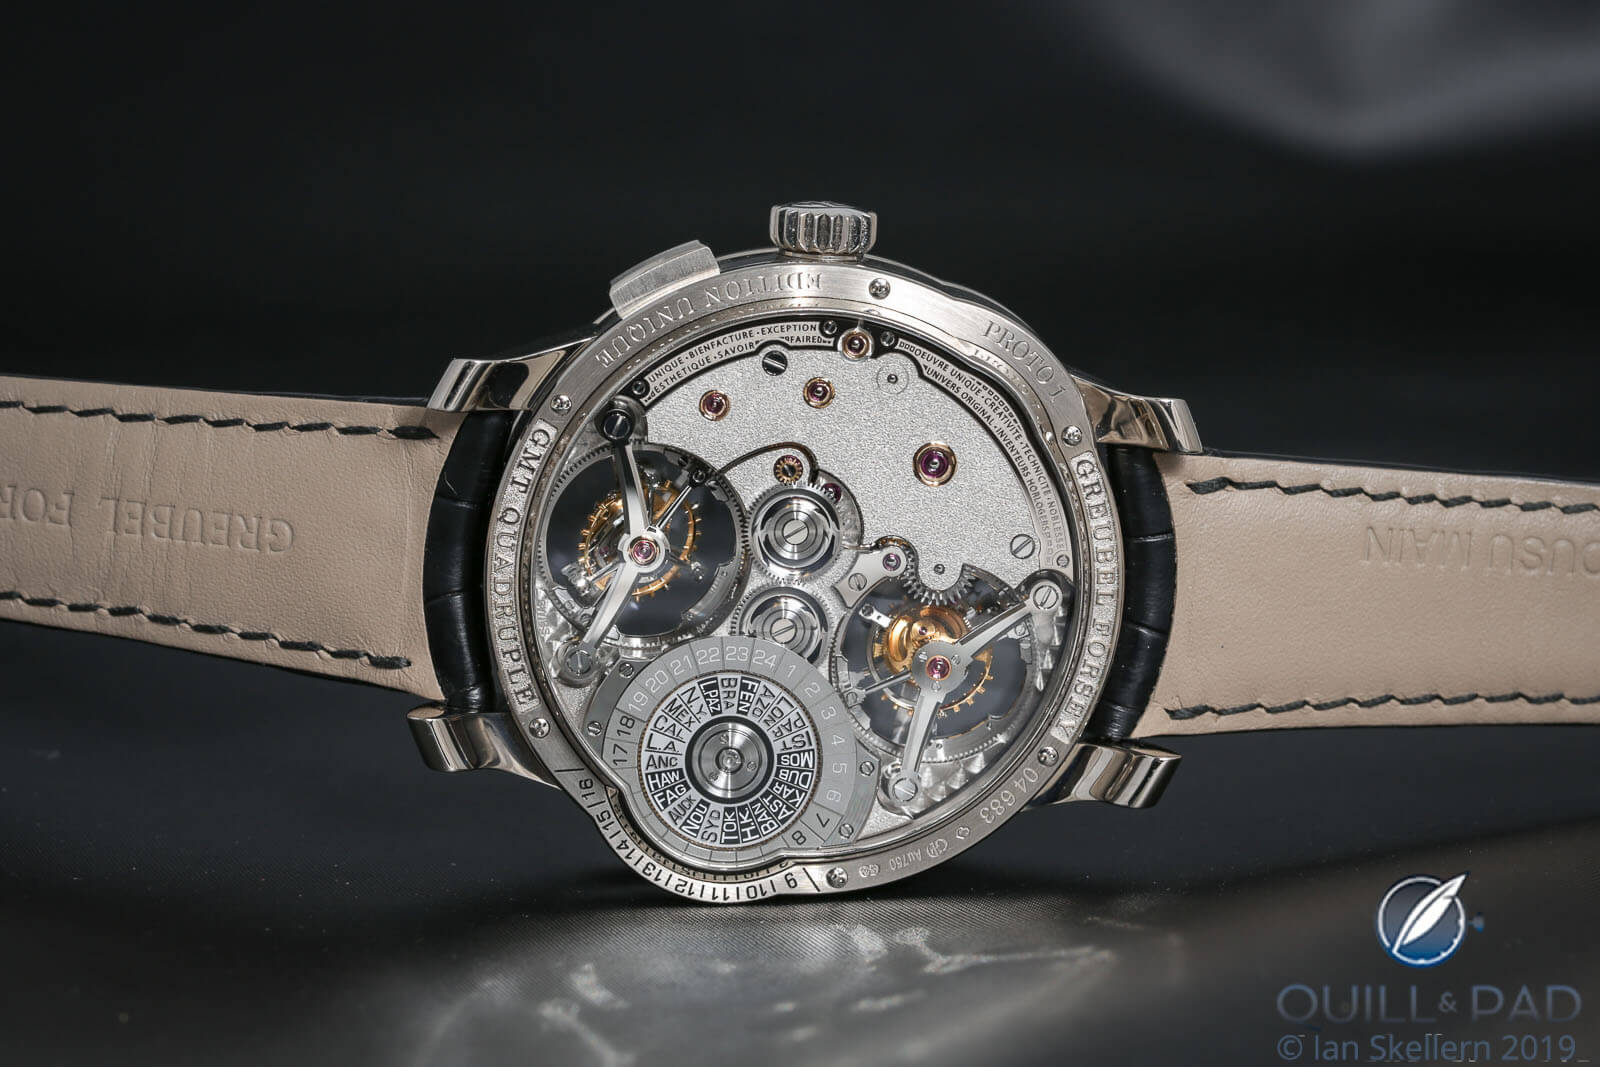 View though the display back of the Greubel Forsey GMT Quadruple Tourbillon